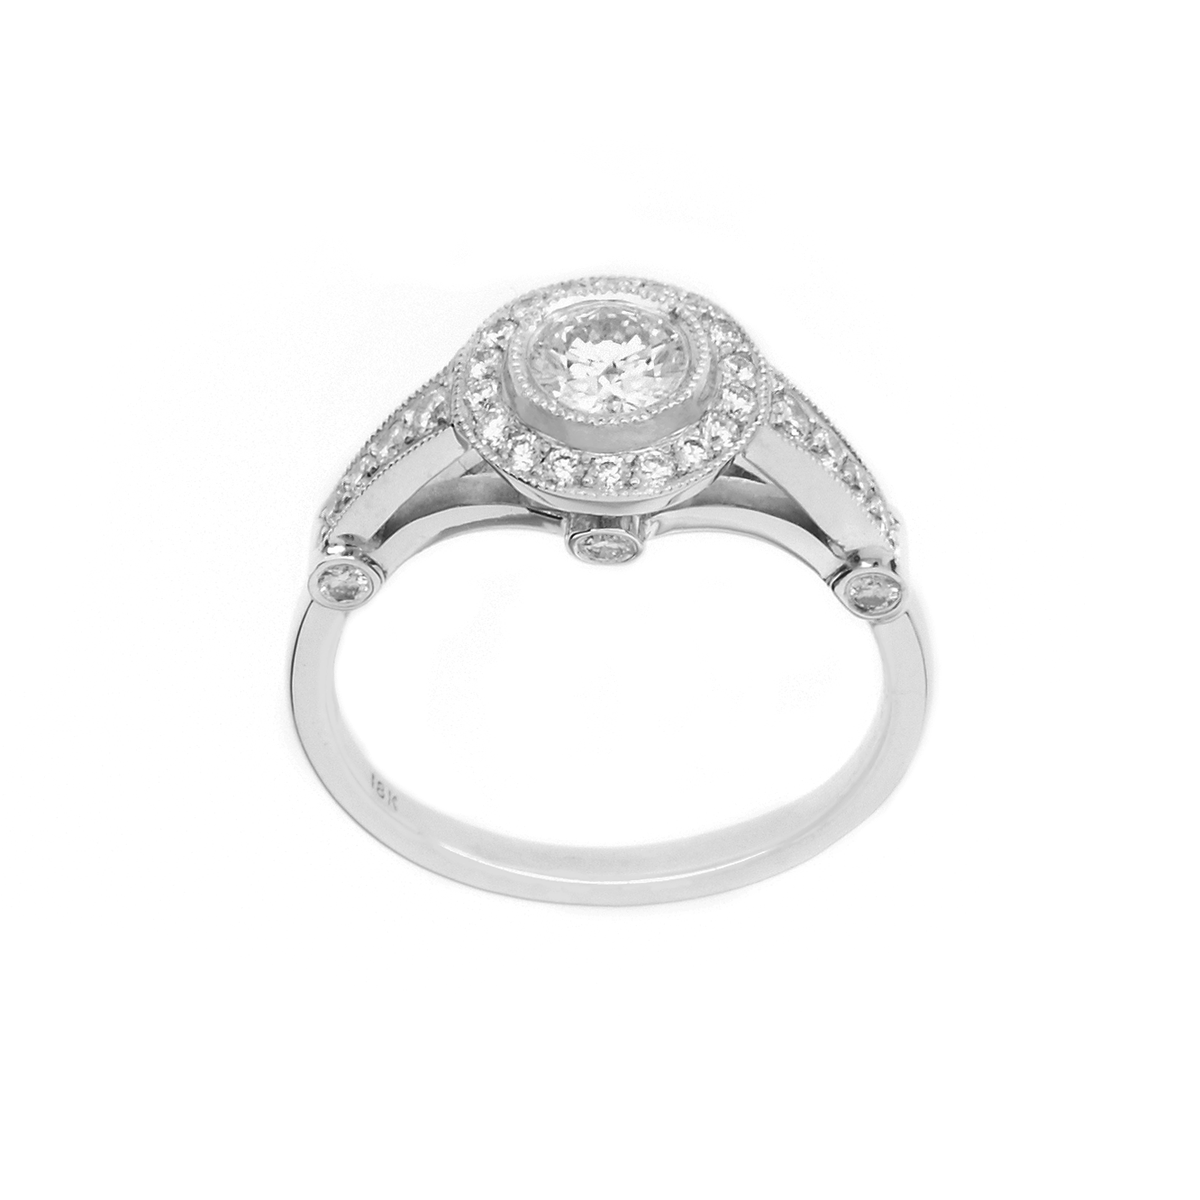 DIAMOND ENGAGEMENT RING - Chris Aire Fine Jewelry & Timepieces